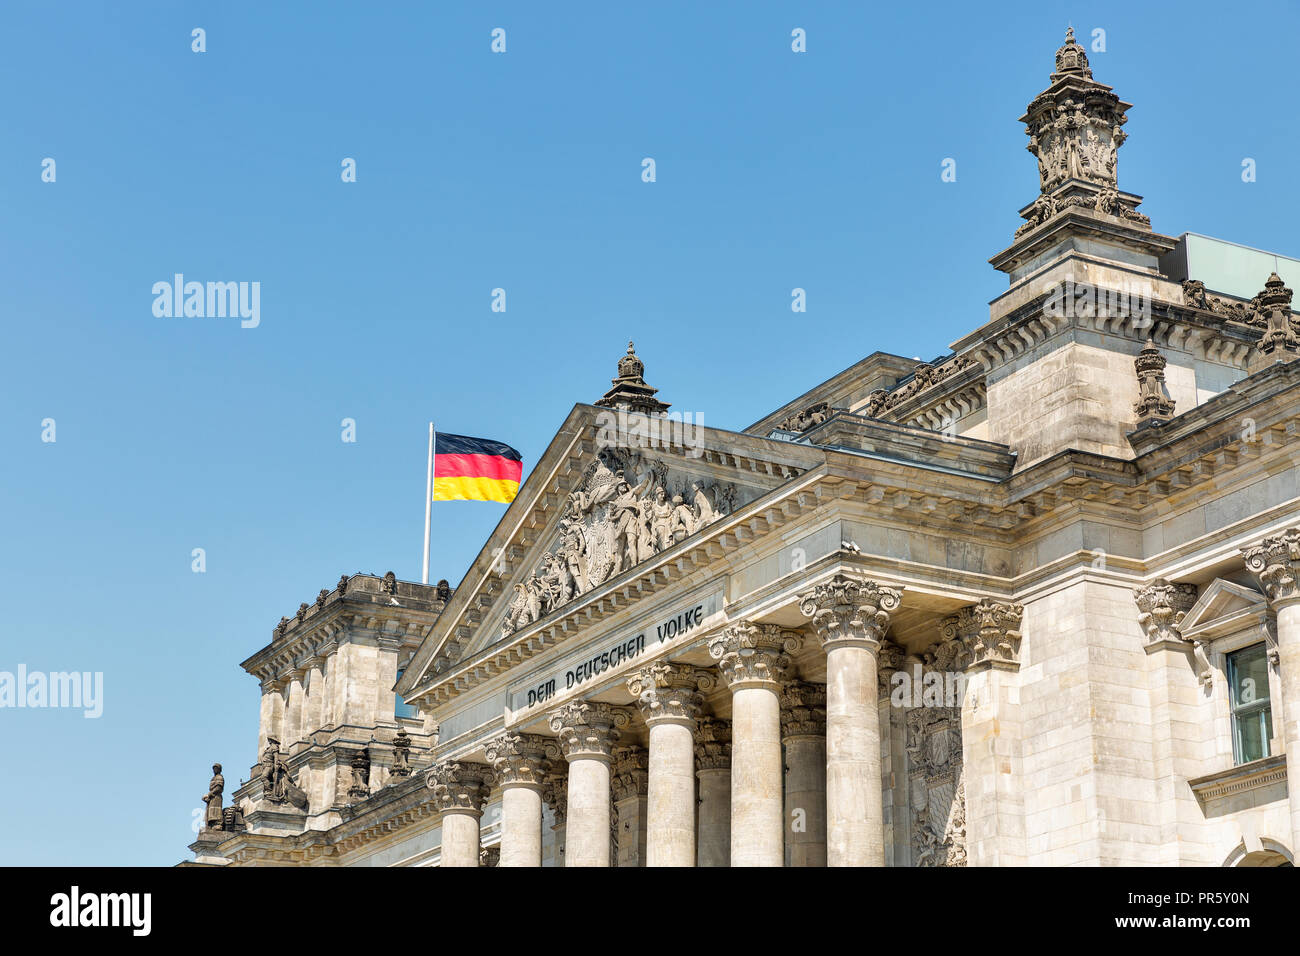 Closeup view of famous Reichstag building with German flag, seat of the German Parliament. Berlin Mitte district, Germany. Stock Photo